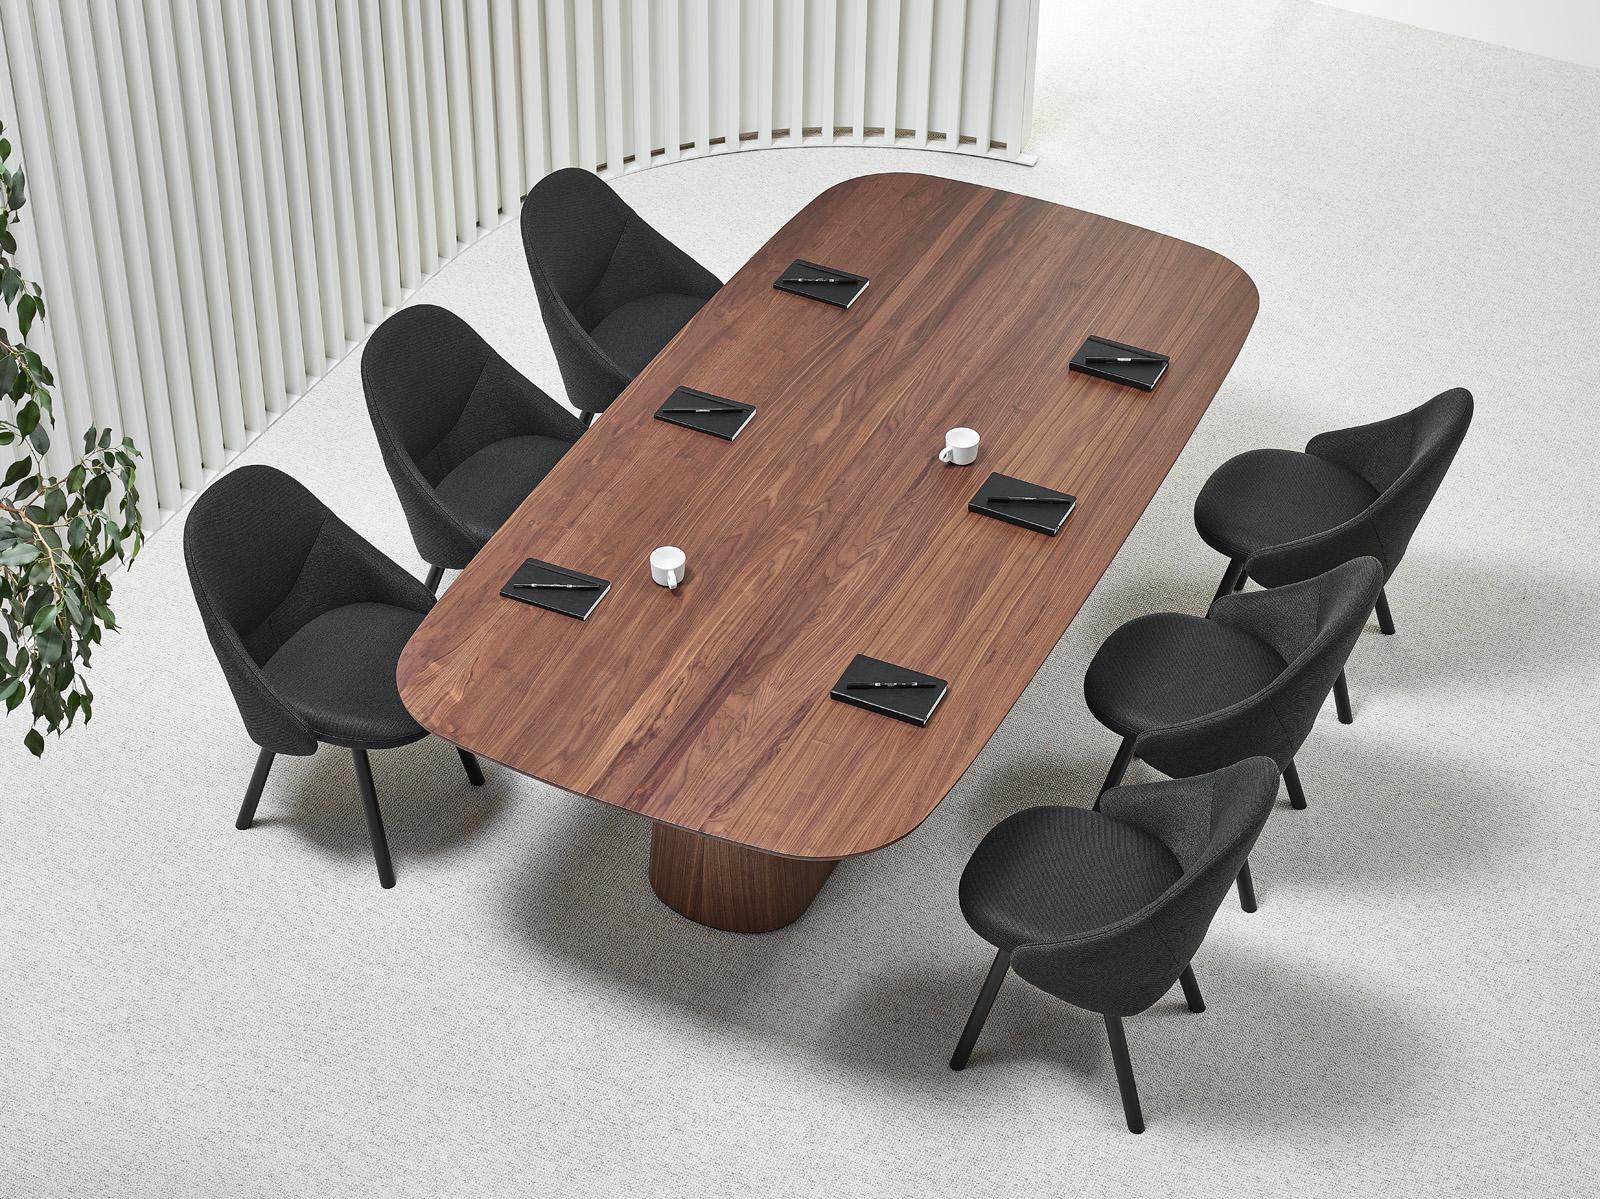 Czech Contemporary Dining Table POV 466, Solid Oak or Walnut, 260 For Sale